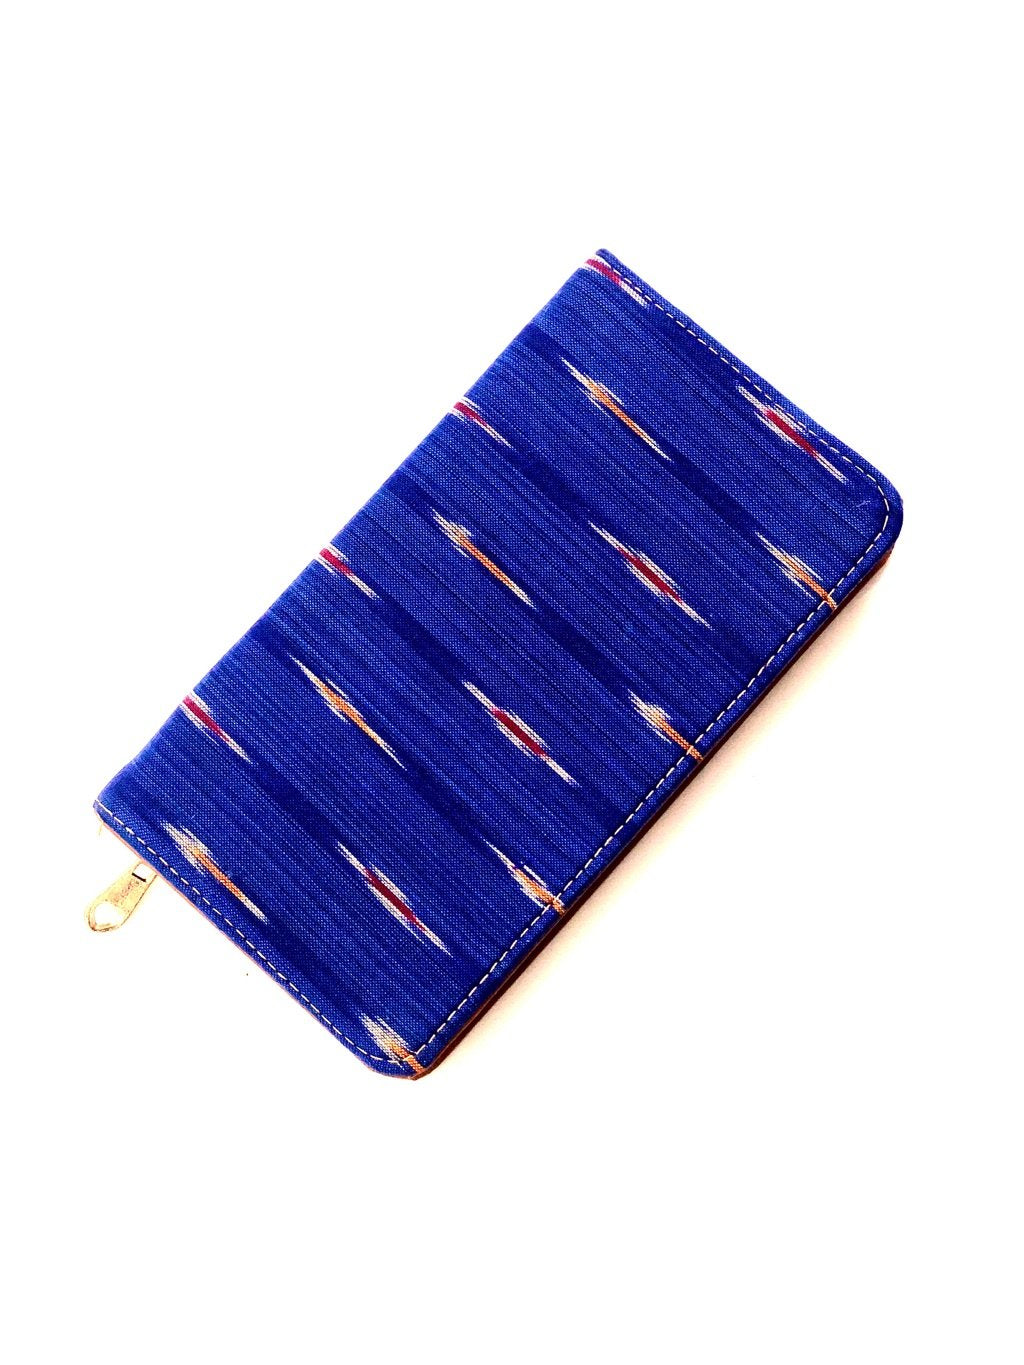 Ikkat Style Clutch Purse Fashion Accessories Parallels Art Tamrapatra